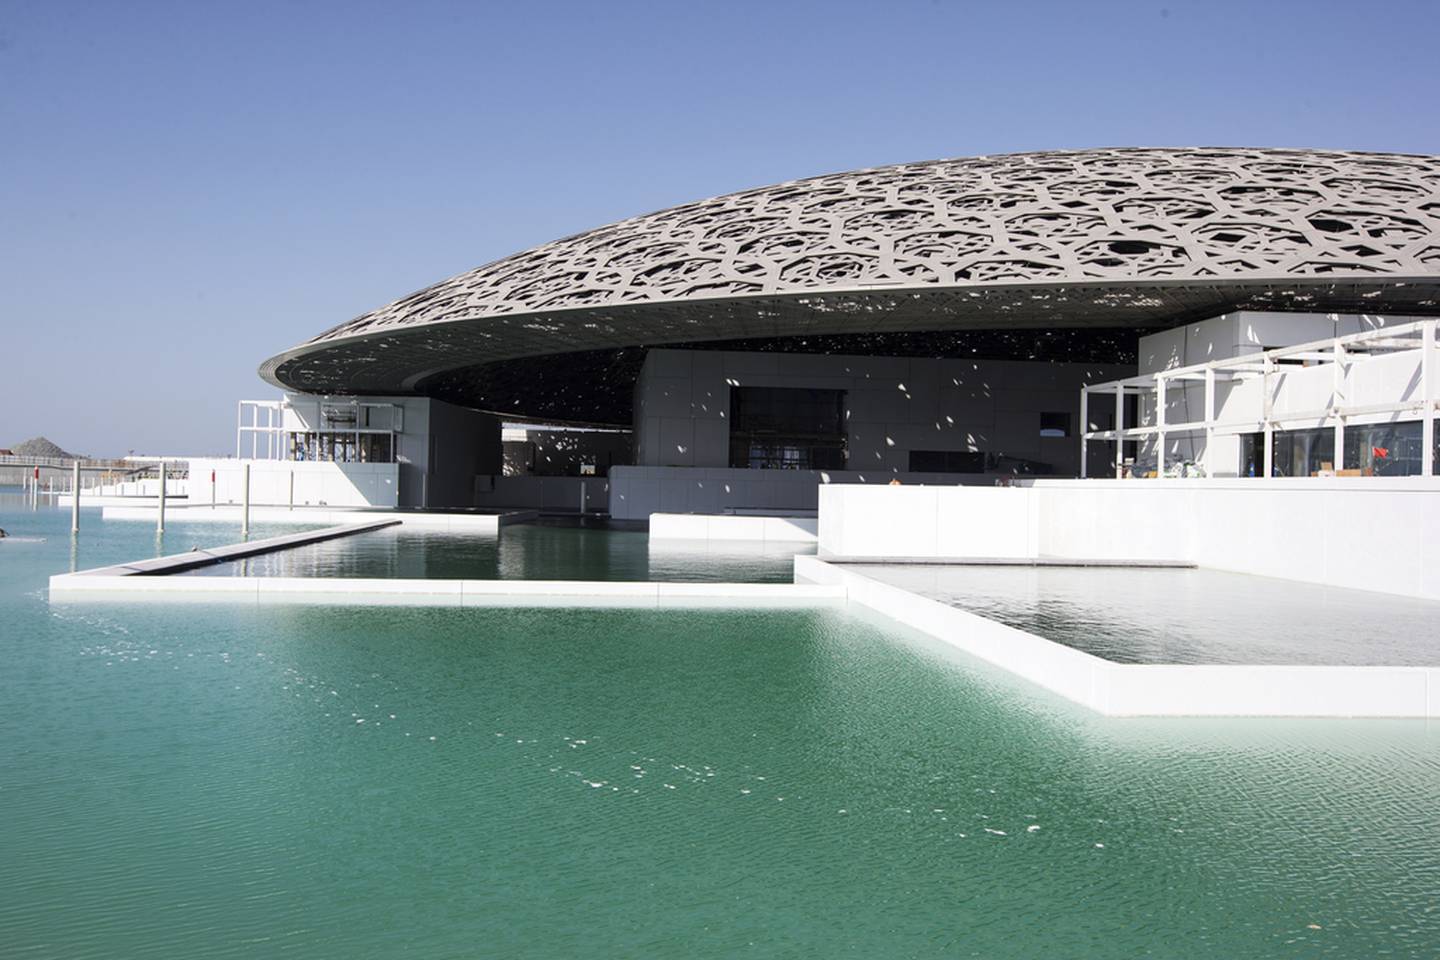 Louvre Abu Dhabi is one of the UAE and France's landmark partnership agreements. Christopher Pike / The National